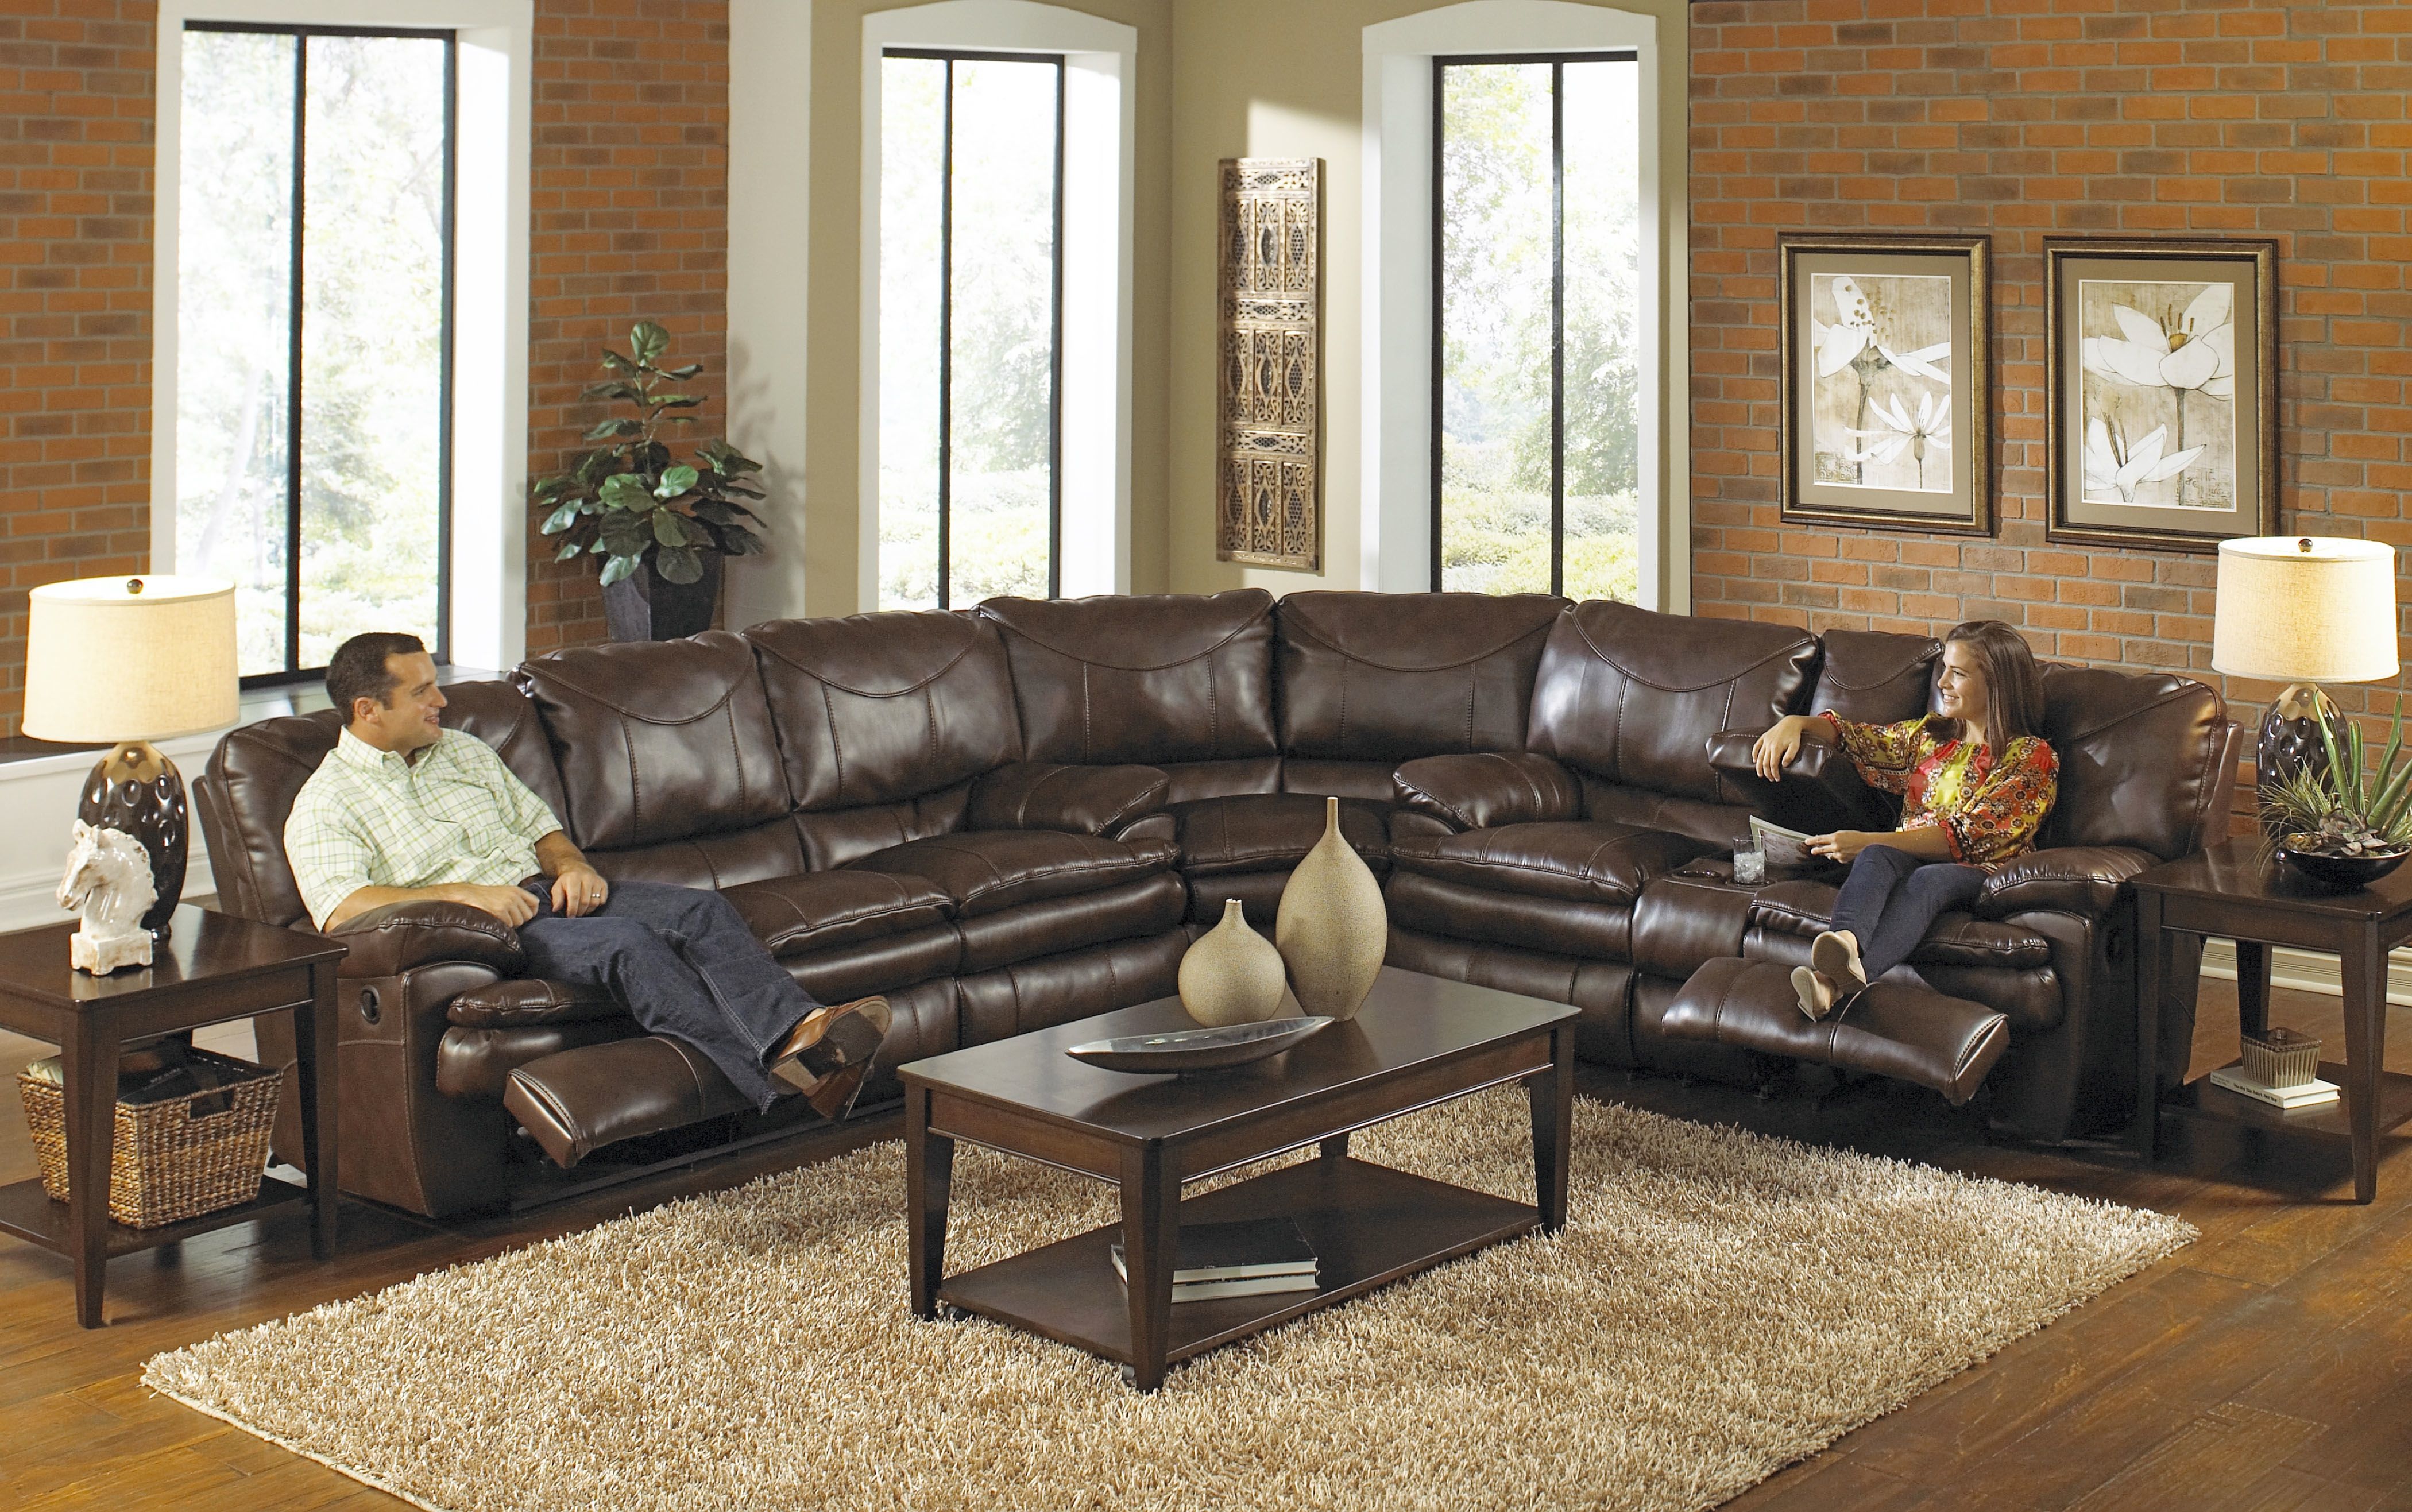 High Quality Sectional Sofas Cleanupflorida With Quality Sectional Sofa 